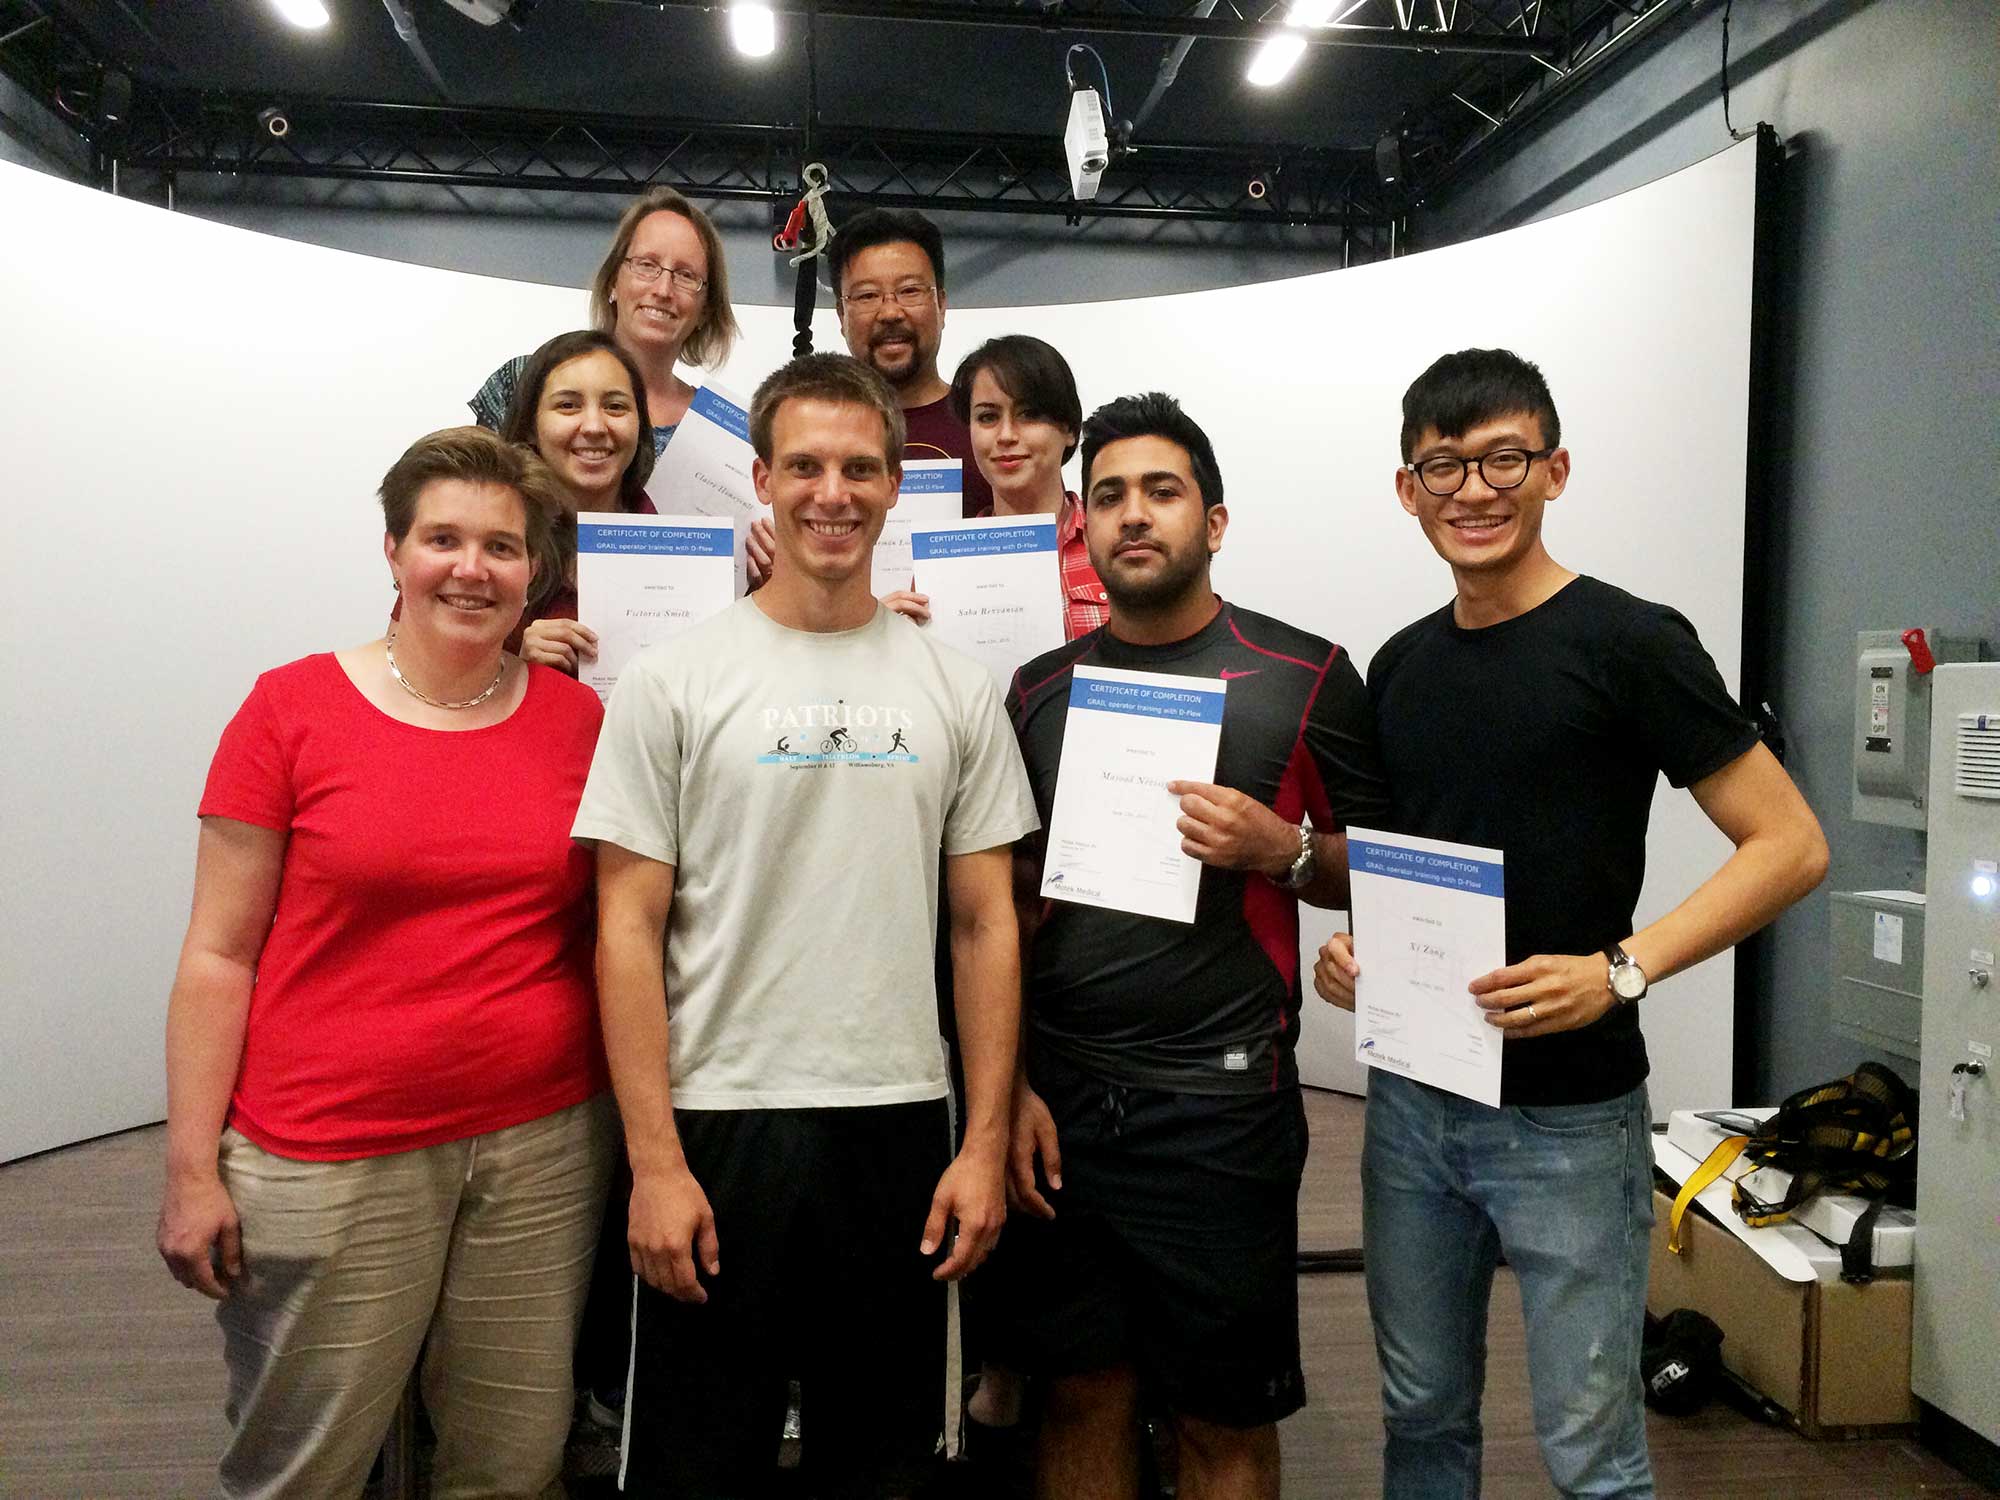 A group of people are shown holding their GRAIL training certificates